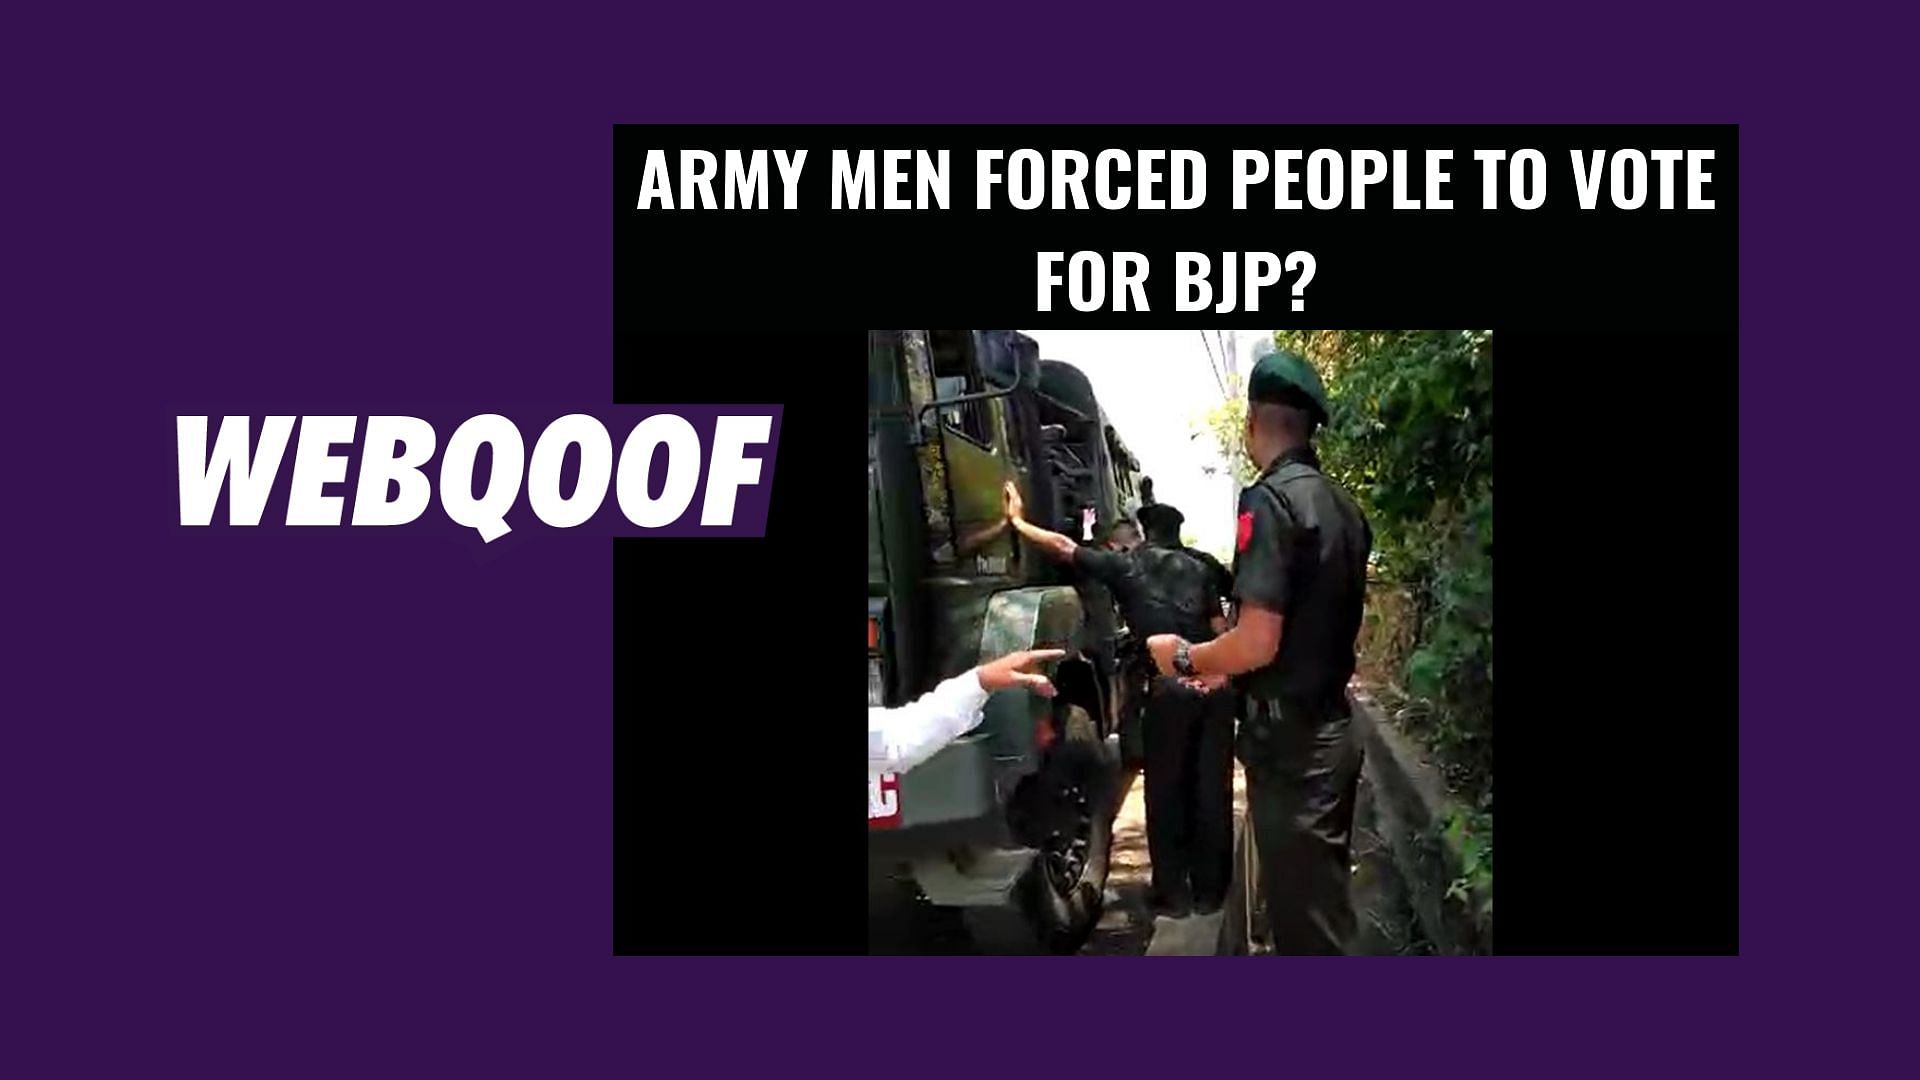 The claims made in the video alleges army men casting proxy votes and campaigning for the BJP.